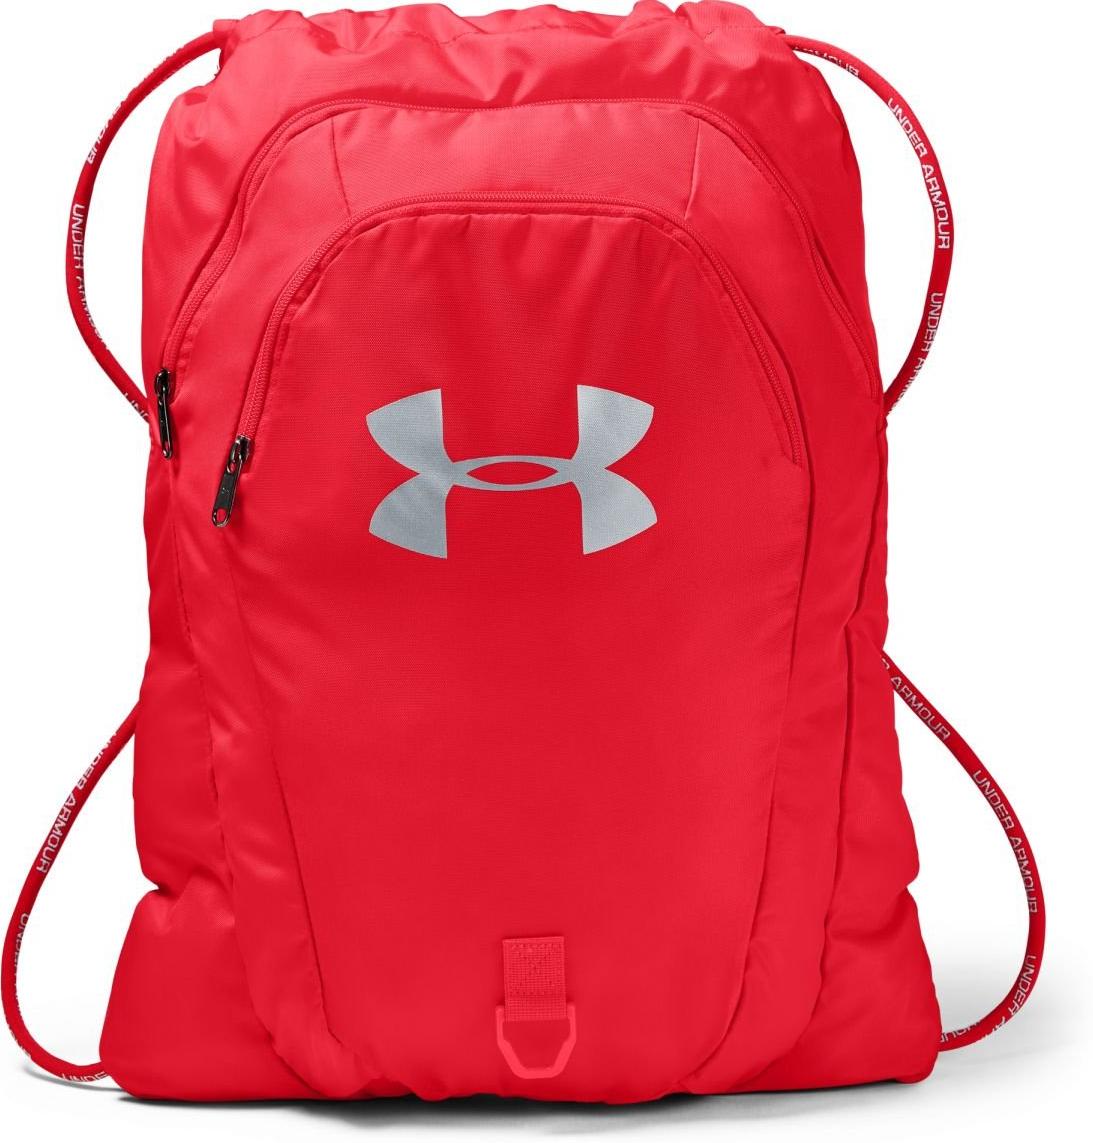 Under Armour unisex-adult Undeniable 2.0 Sackpack 